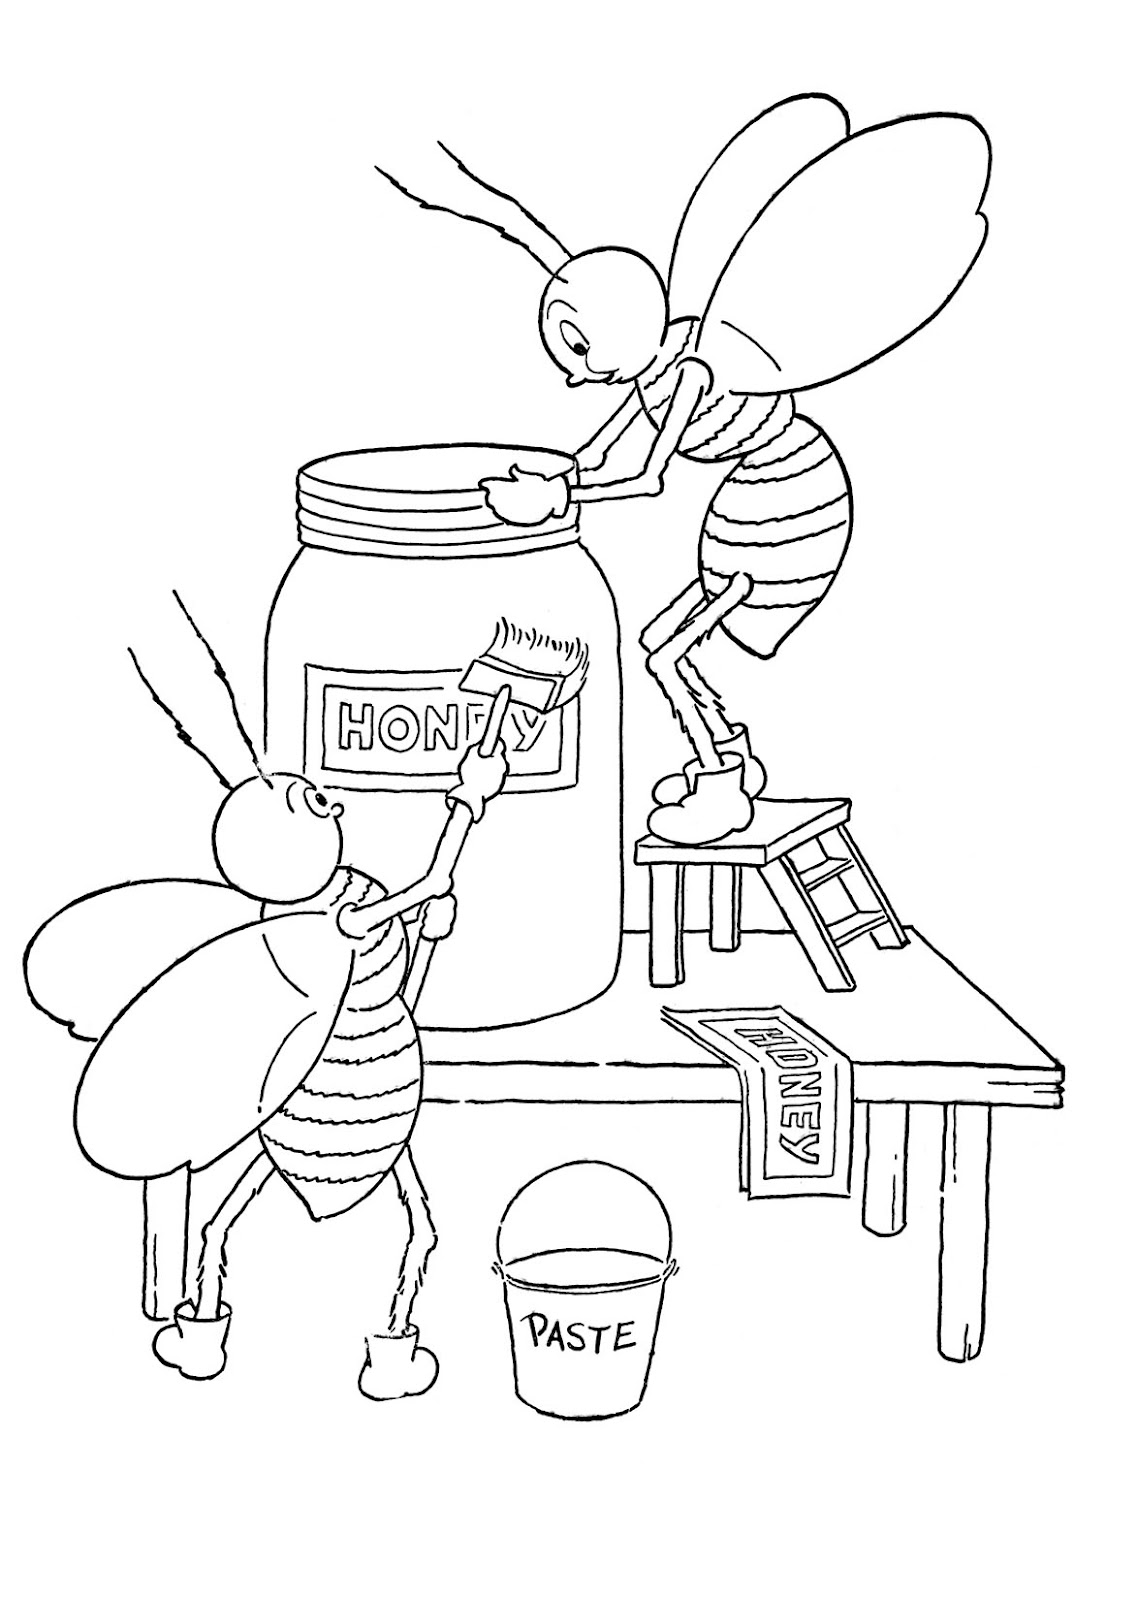 Kids Printable - Honey Bees Coloring Page - The Graphics Fairy1137 x 1600